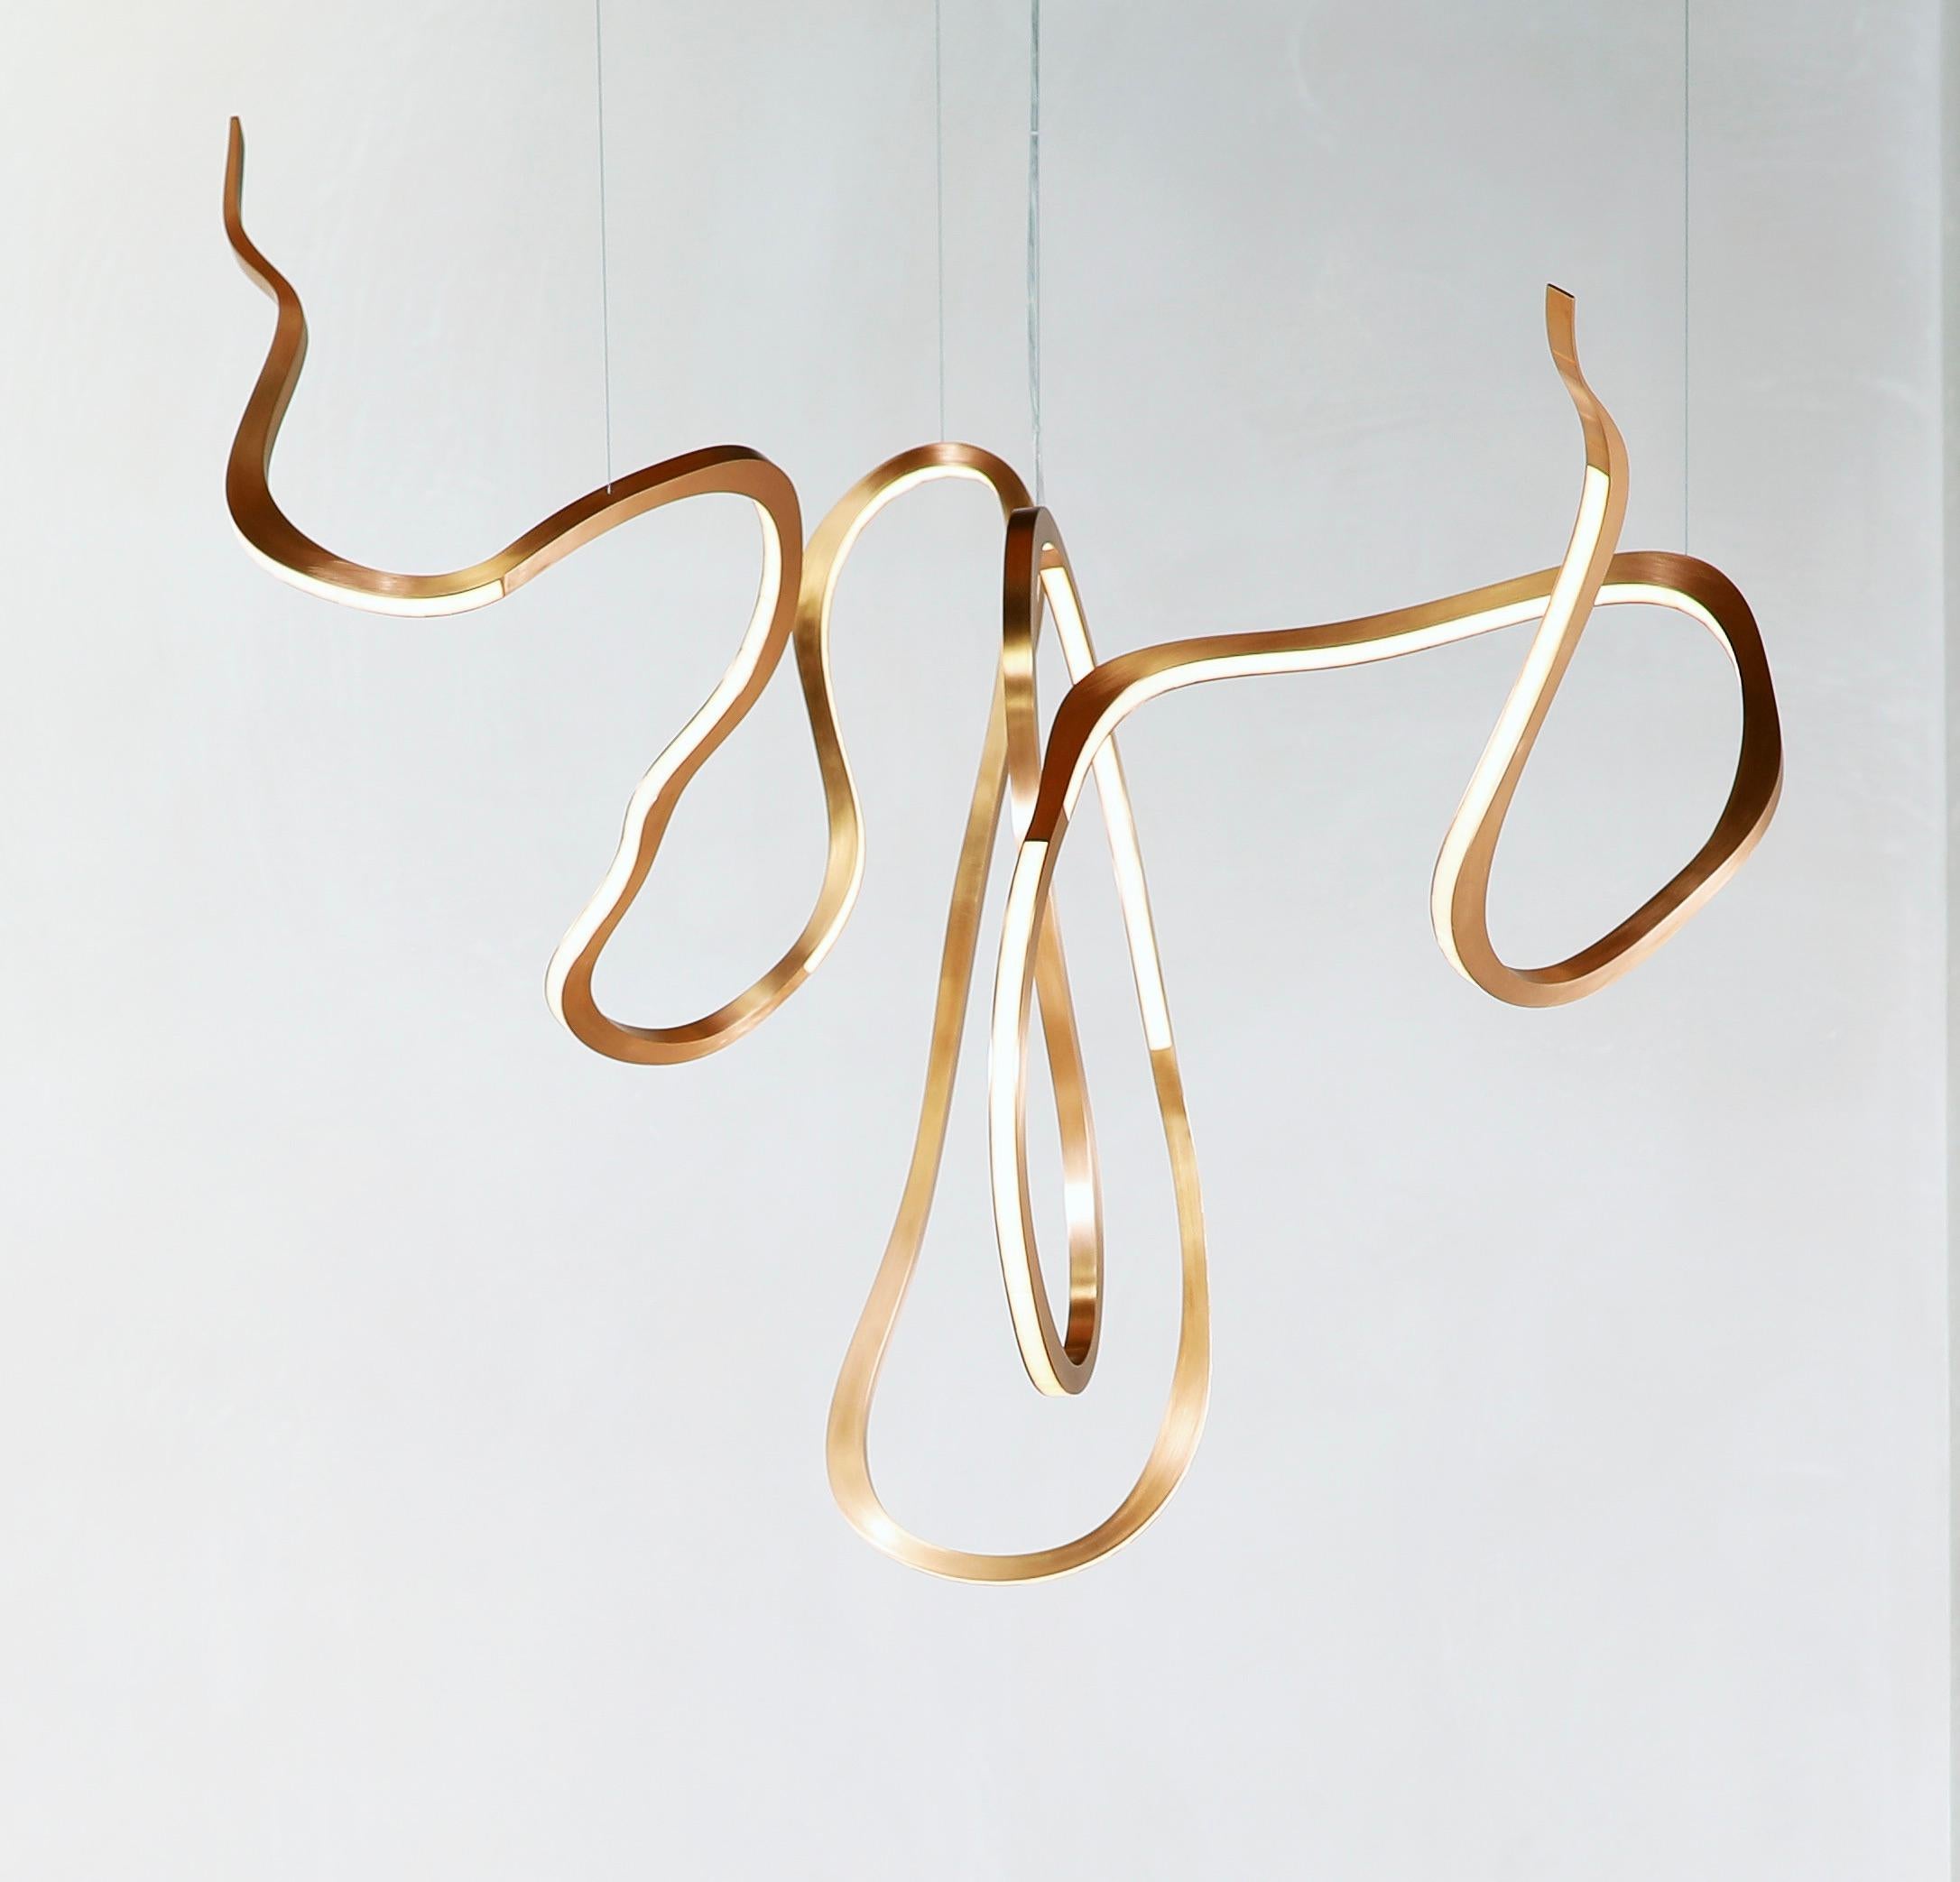 'The Artist's Hand IV', Contemporary Pendant Light Sculpture by Niamh Barry  For Sale at 1stDibs